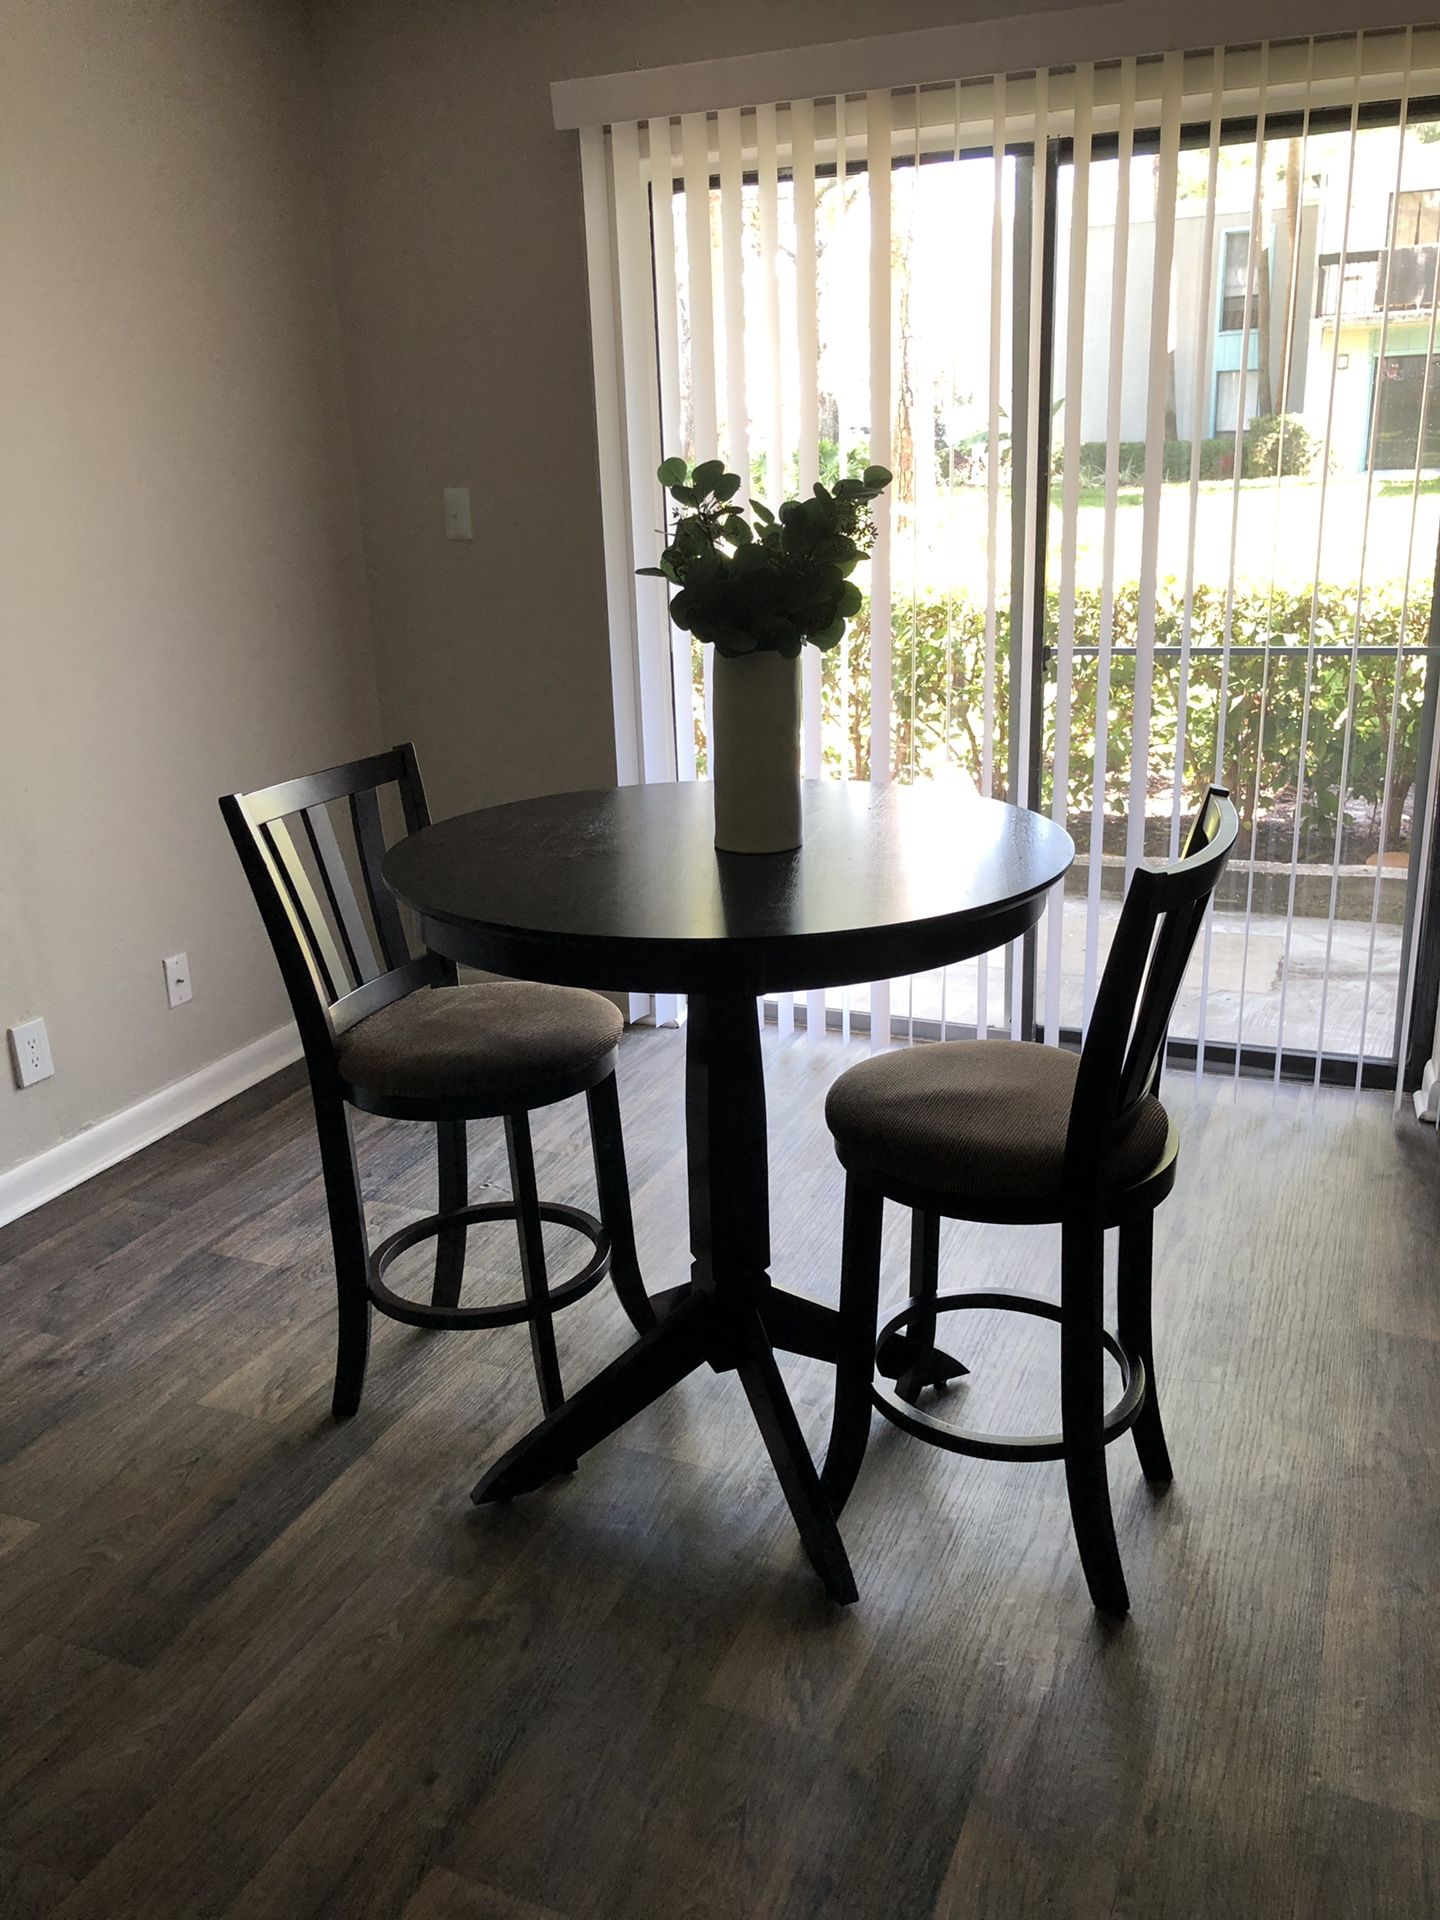 Breakfast nook table + 2 chairs